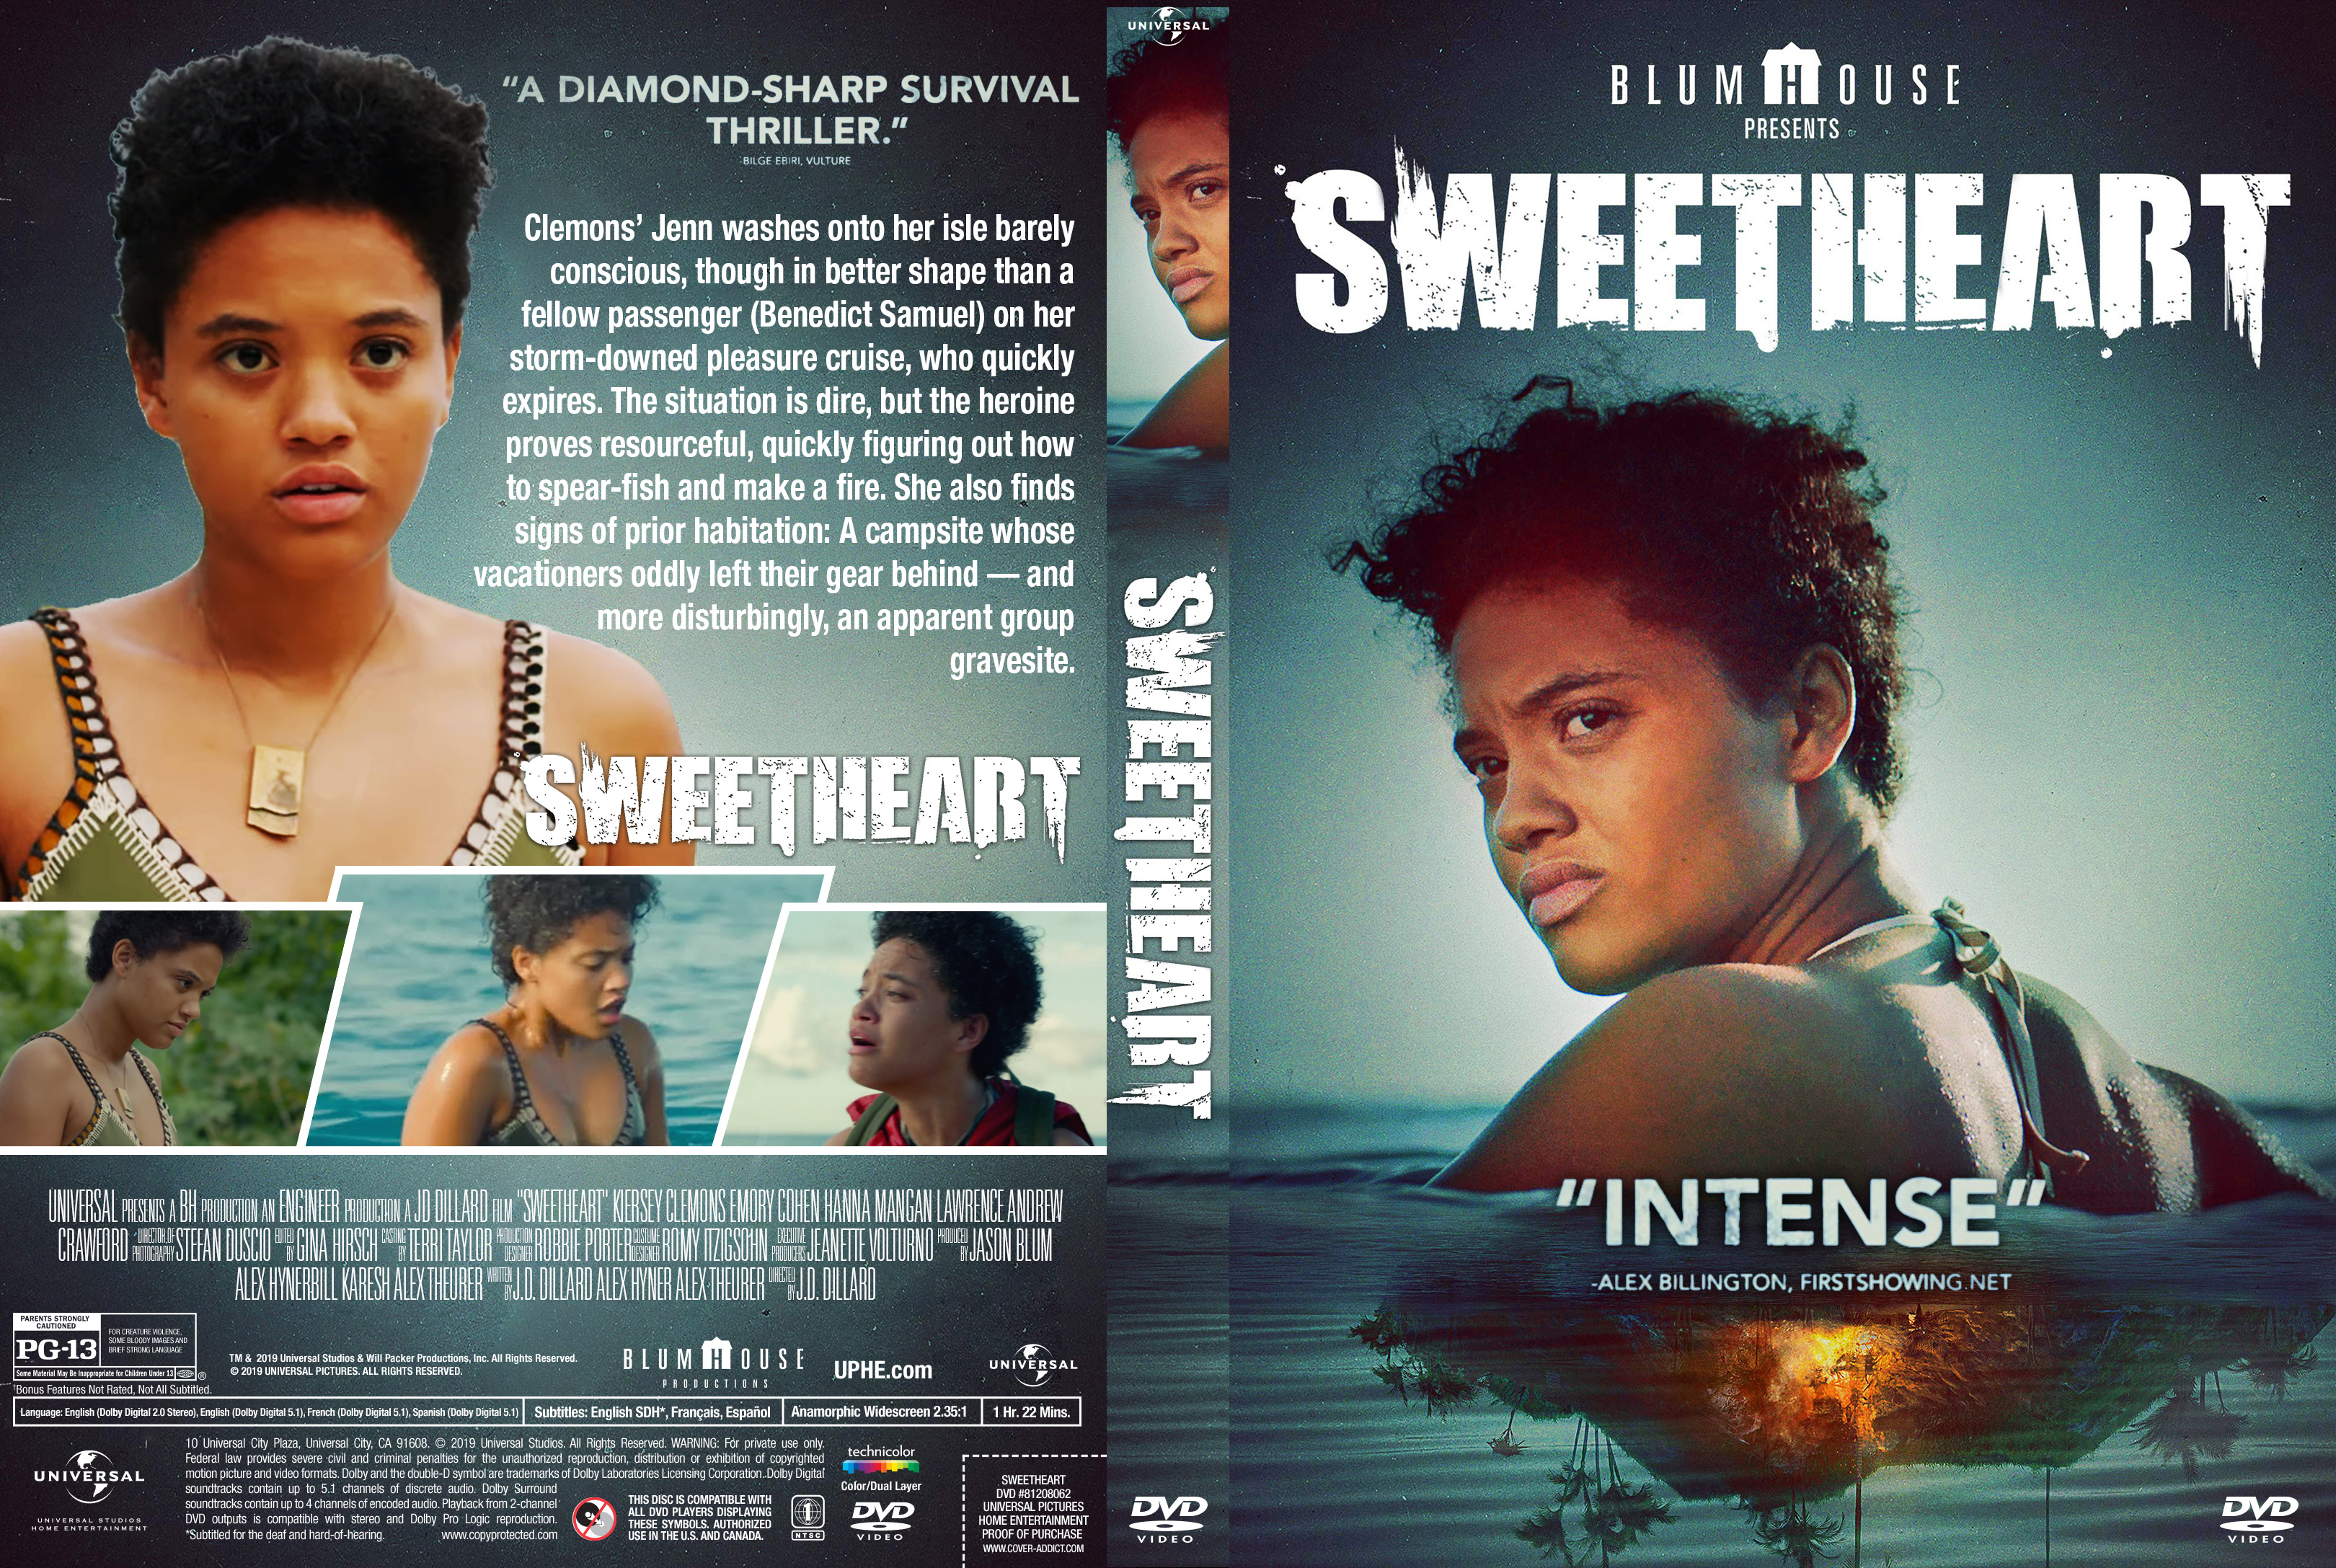 Sweetheart 2019 Front Dvd Covers Cover Century Over 500 000 Album Art Covers For Free